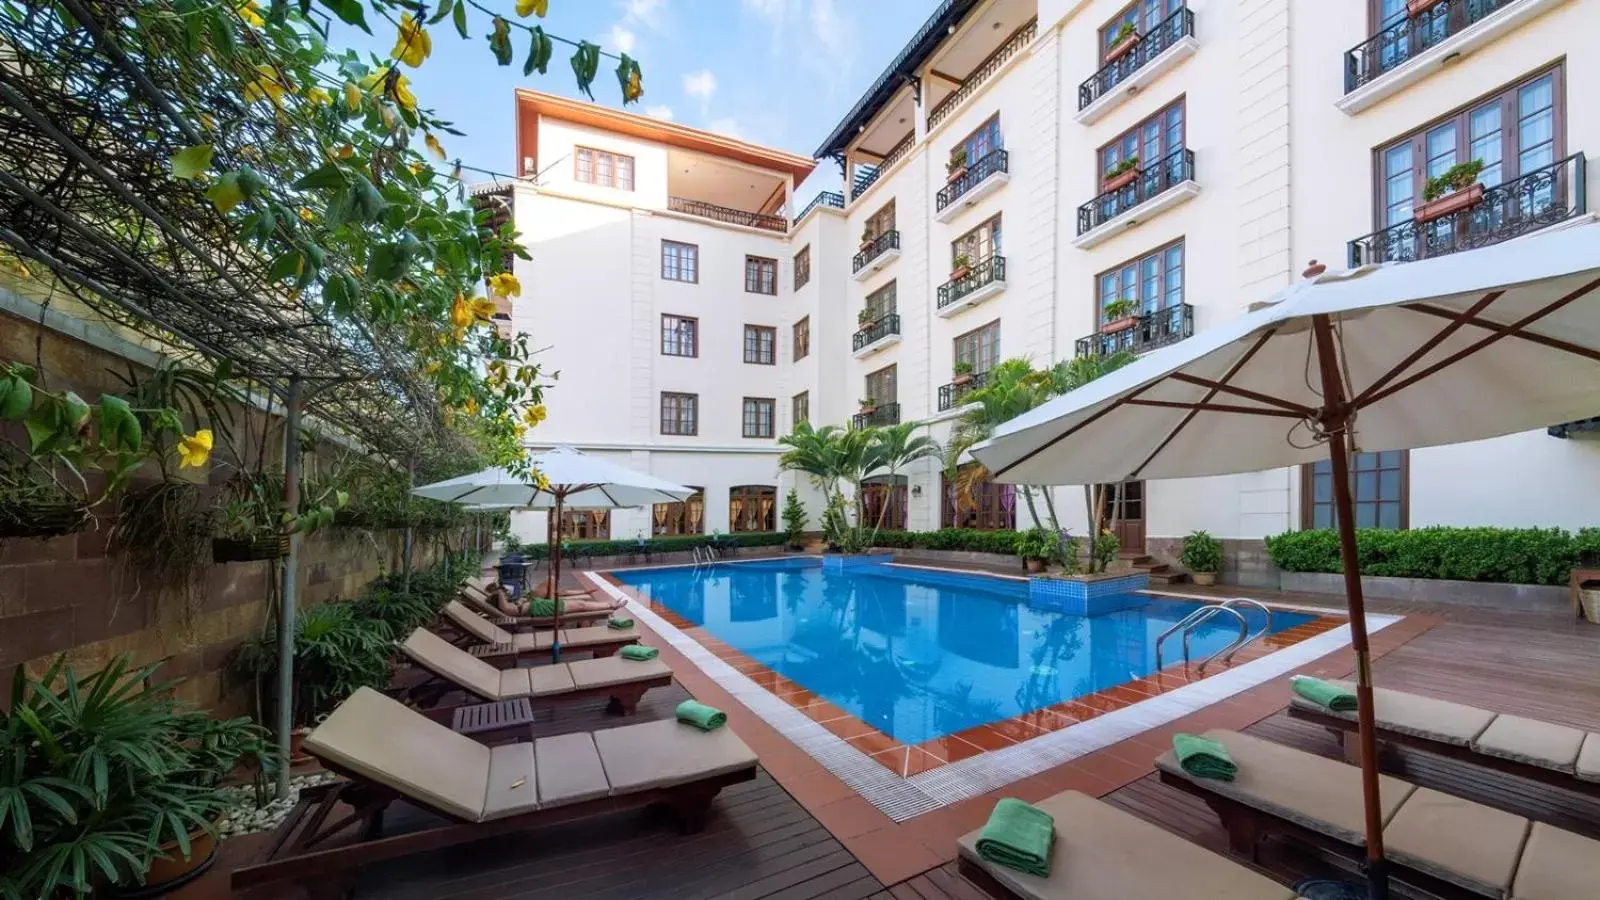 Property building, Swimming Pool in Steung Siemreap Hotel